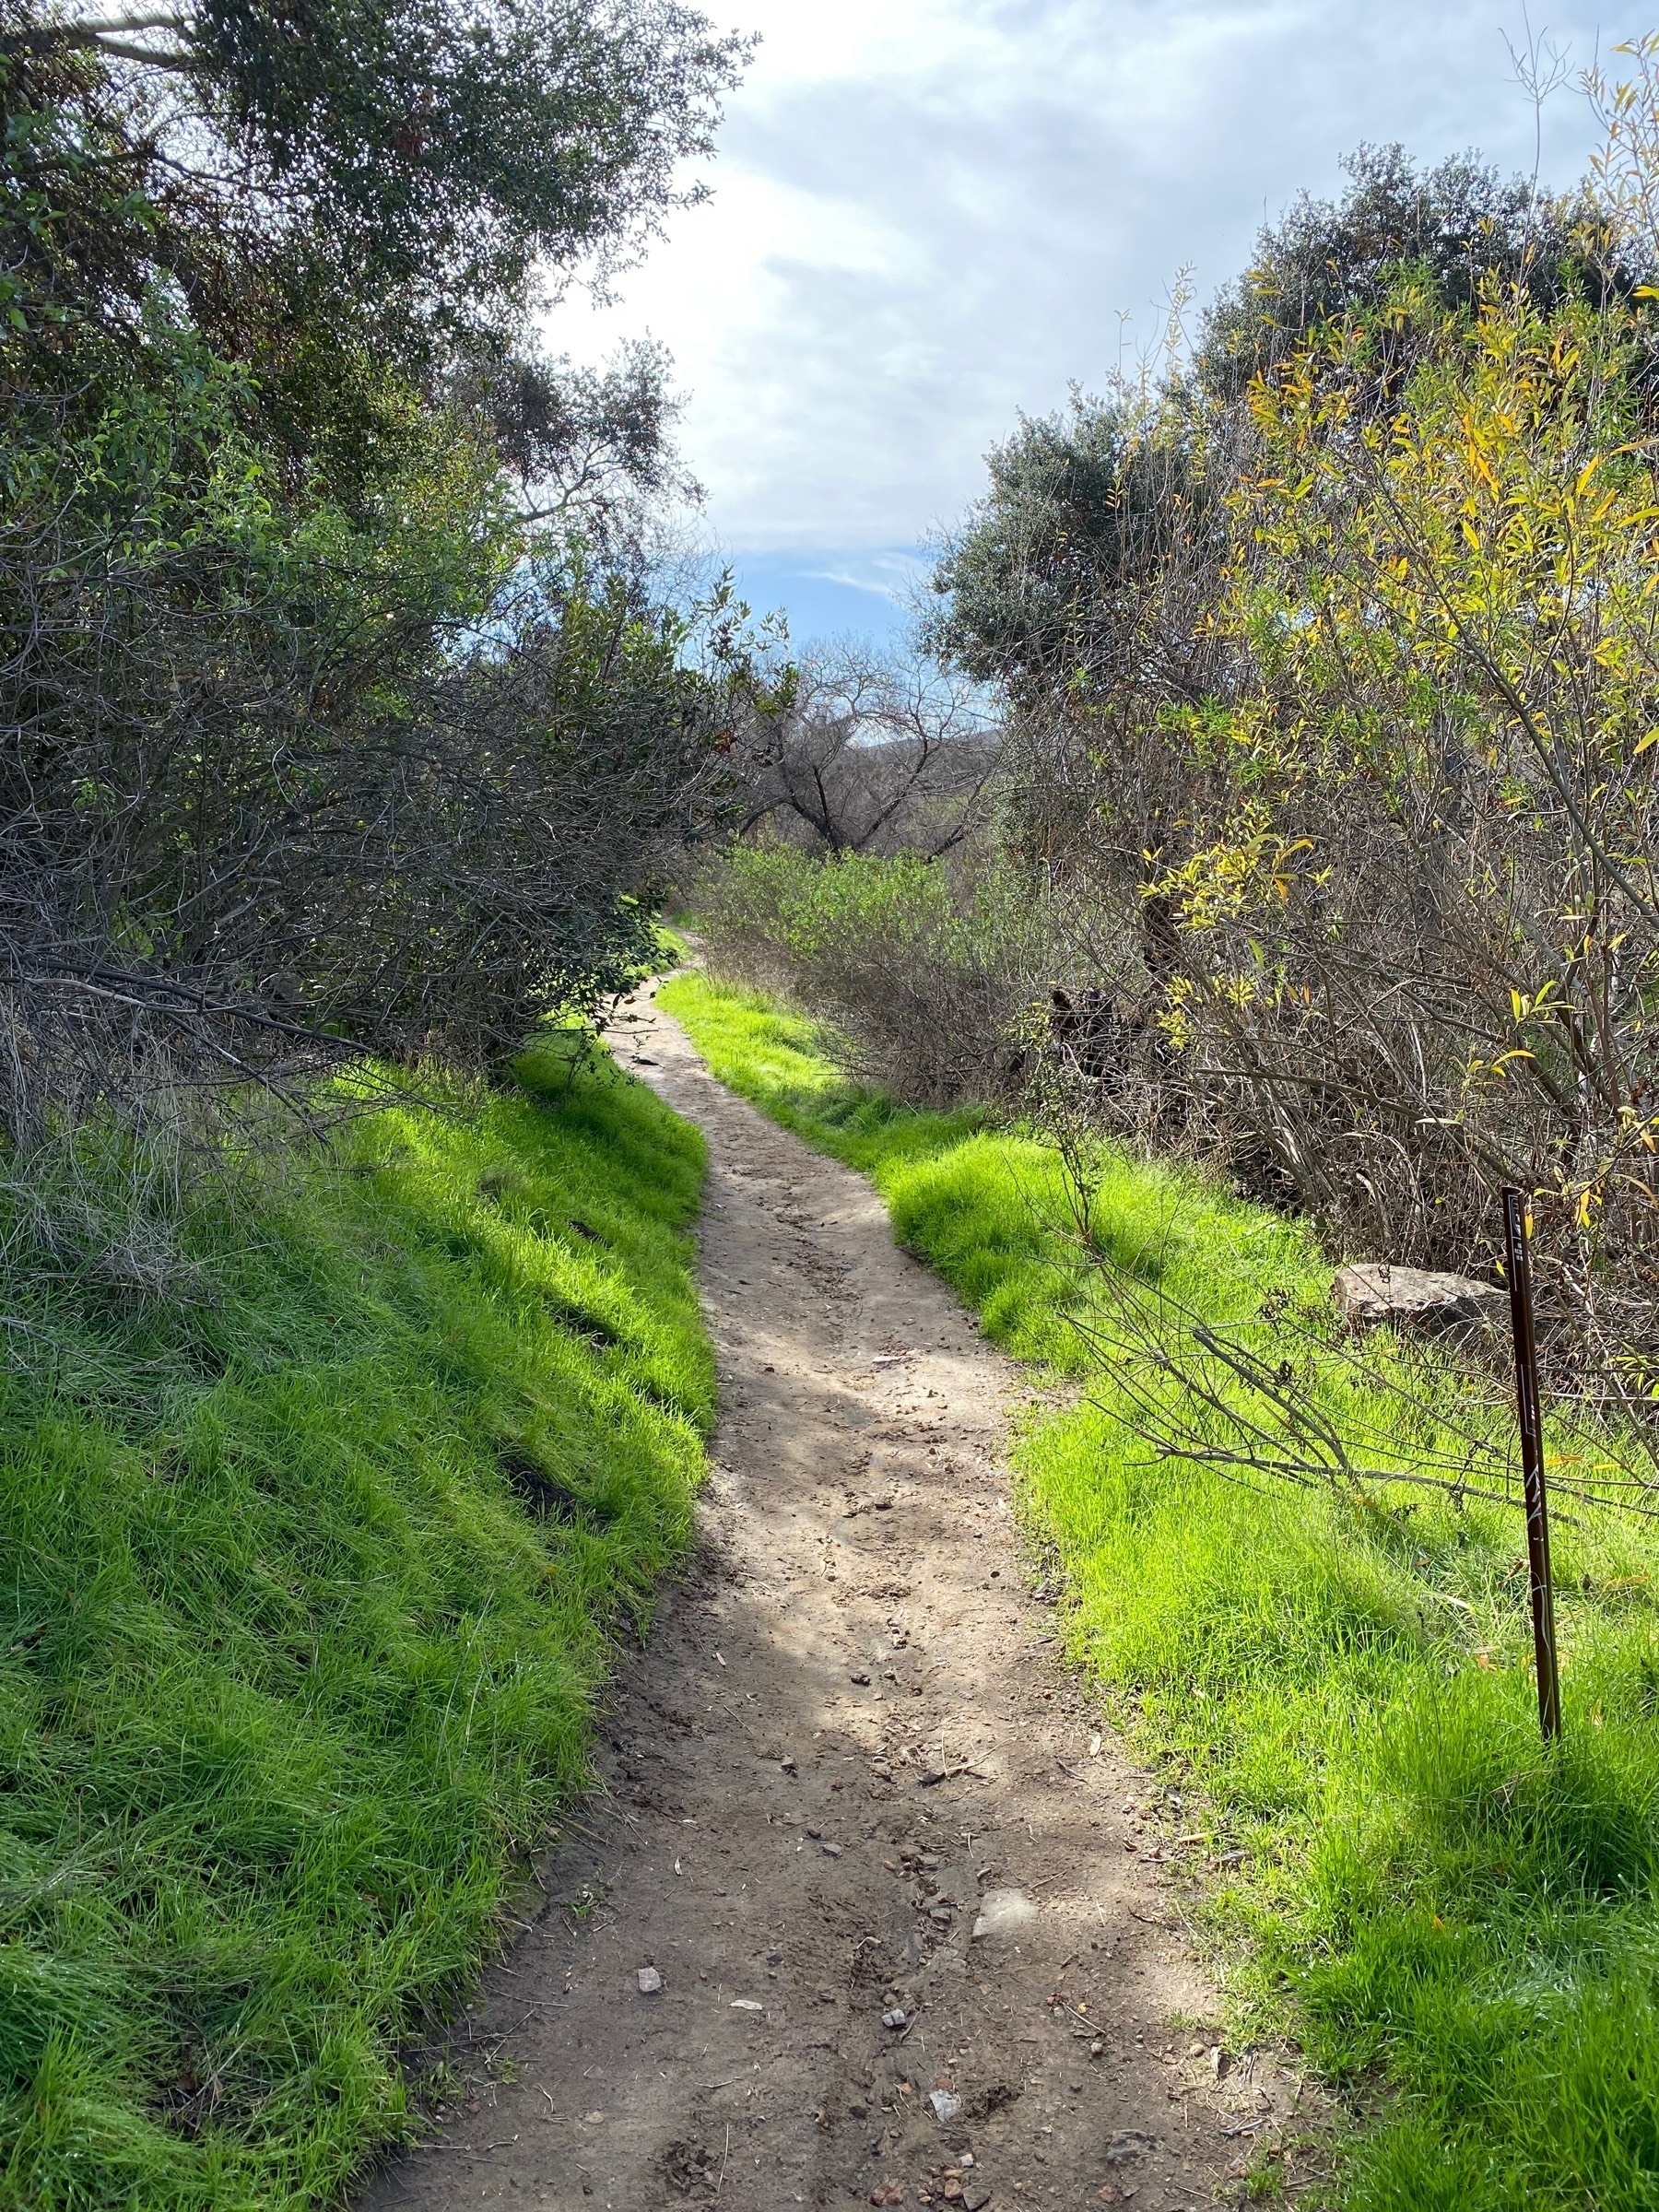 View of a sunlit dirt path with green grass and low trees on either side.